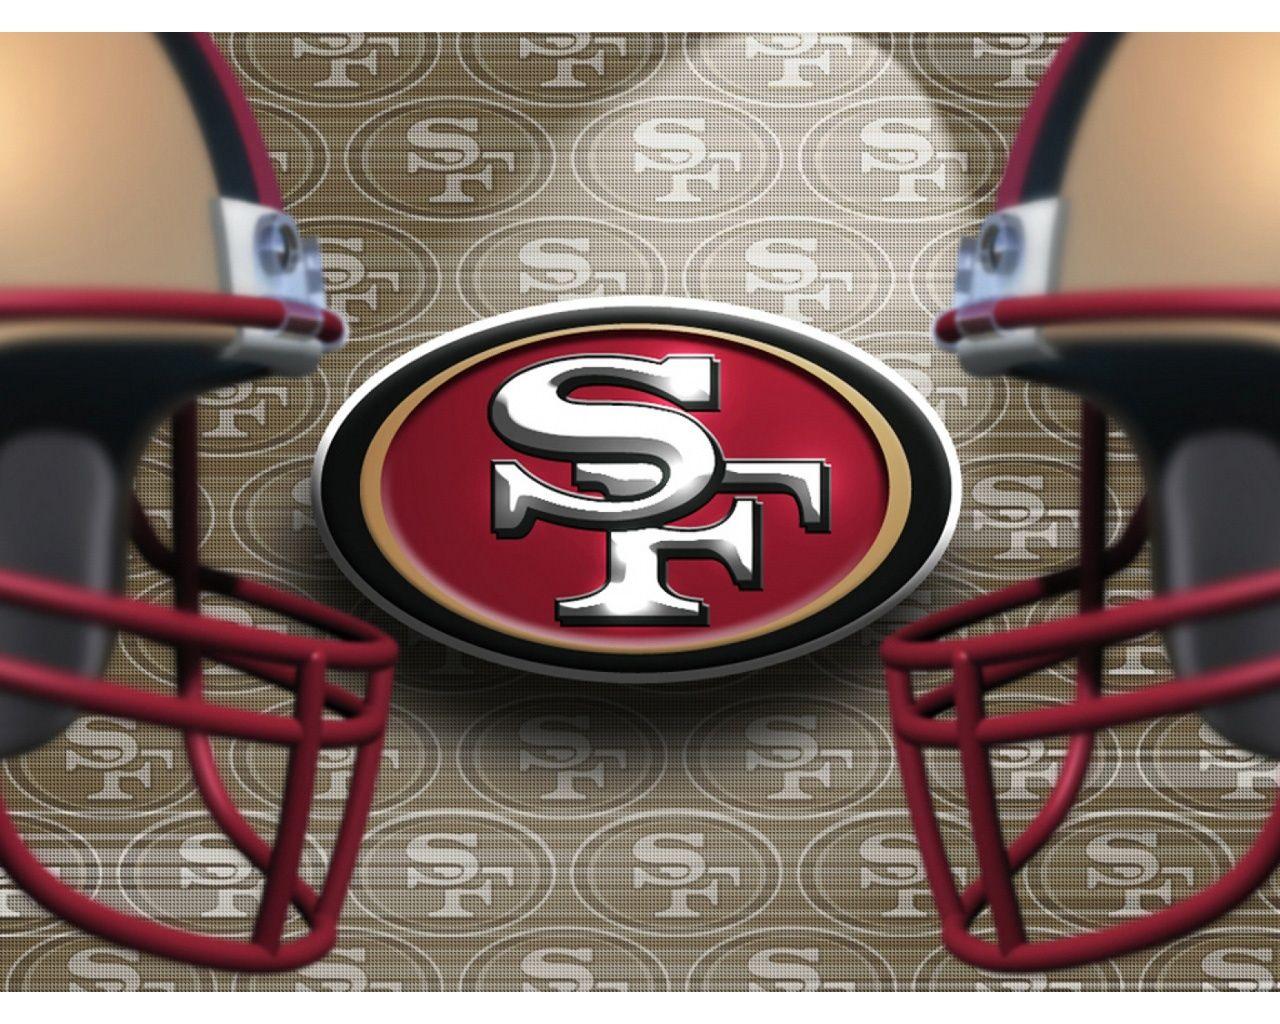 49ers wallpaper wednesday 4 - Image And Wallpaper free